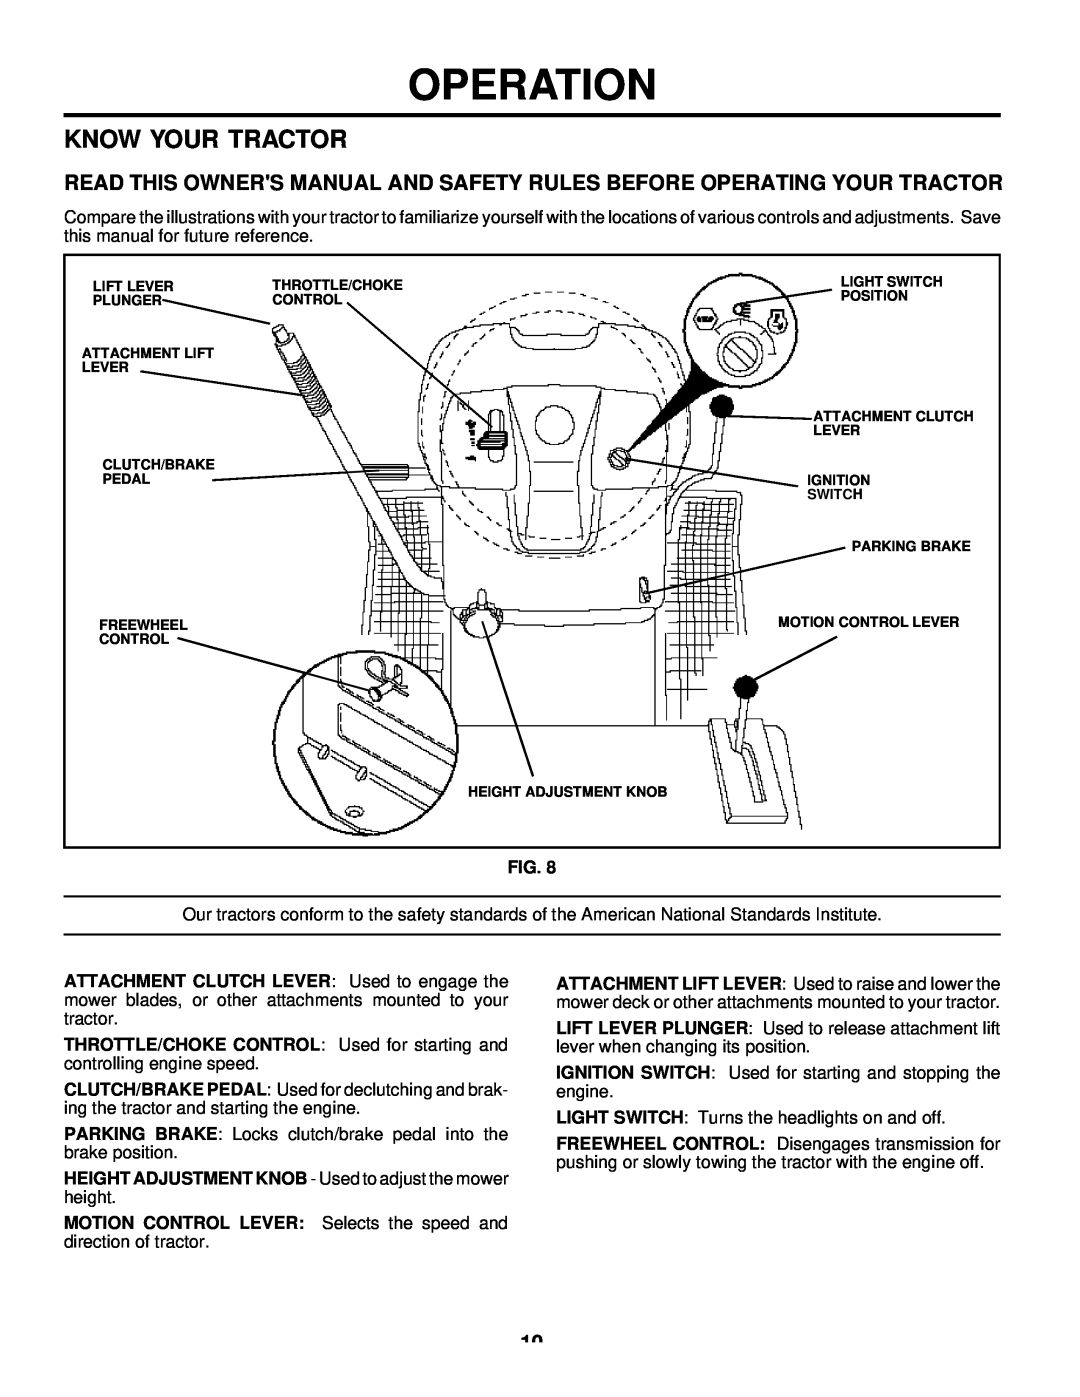 Husqvarna LTH125 owner manual Operation, Know Your Tractor, HEIGHT ADJUSTMENT KNOB - Used to adjust the mower height 